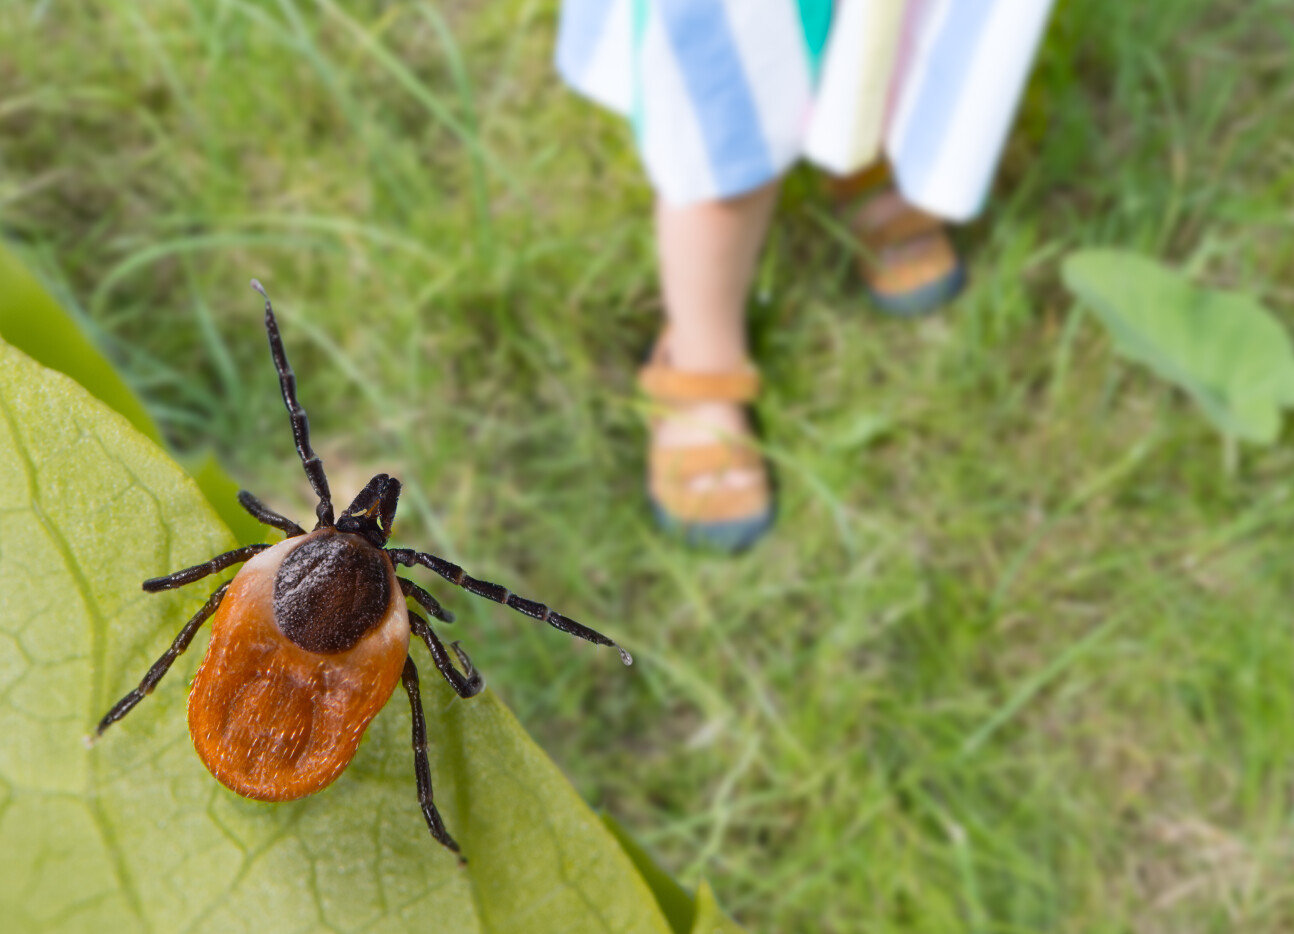 Tick on a leaf with a child's leg in the background